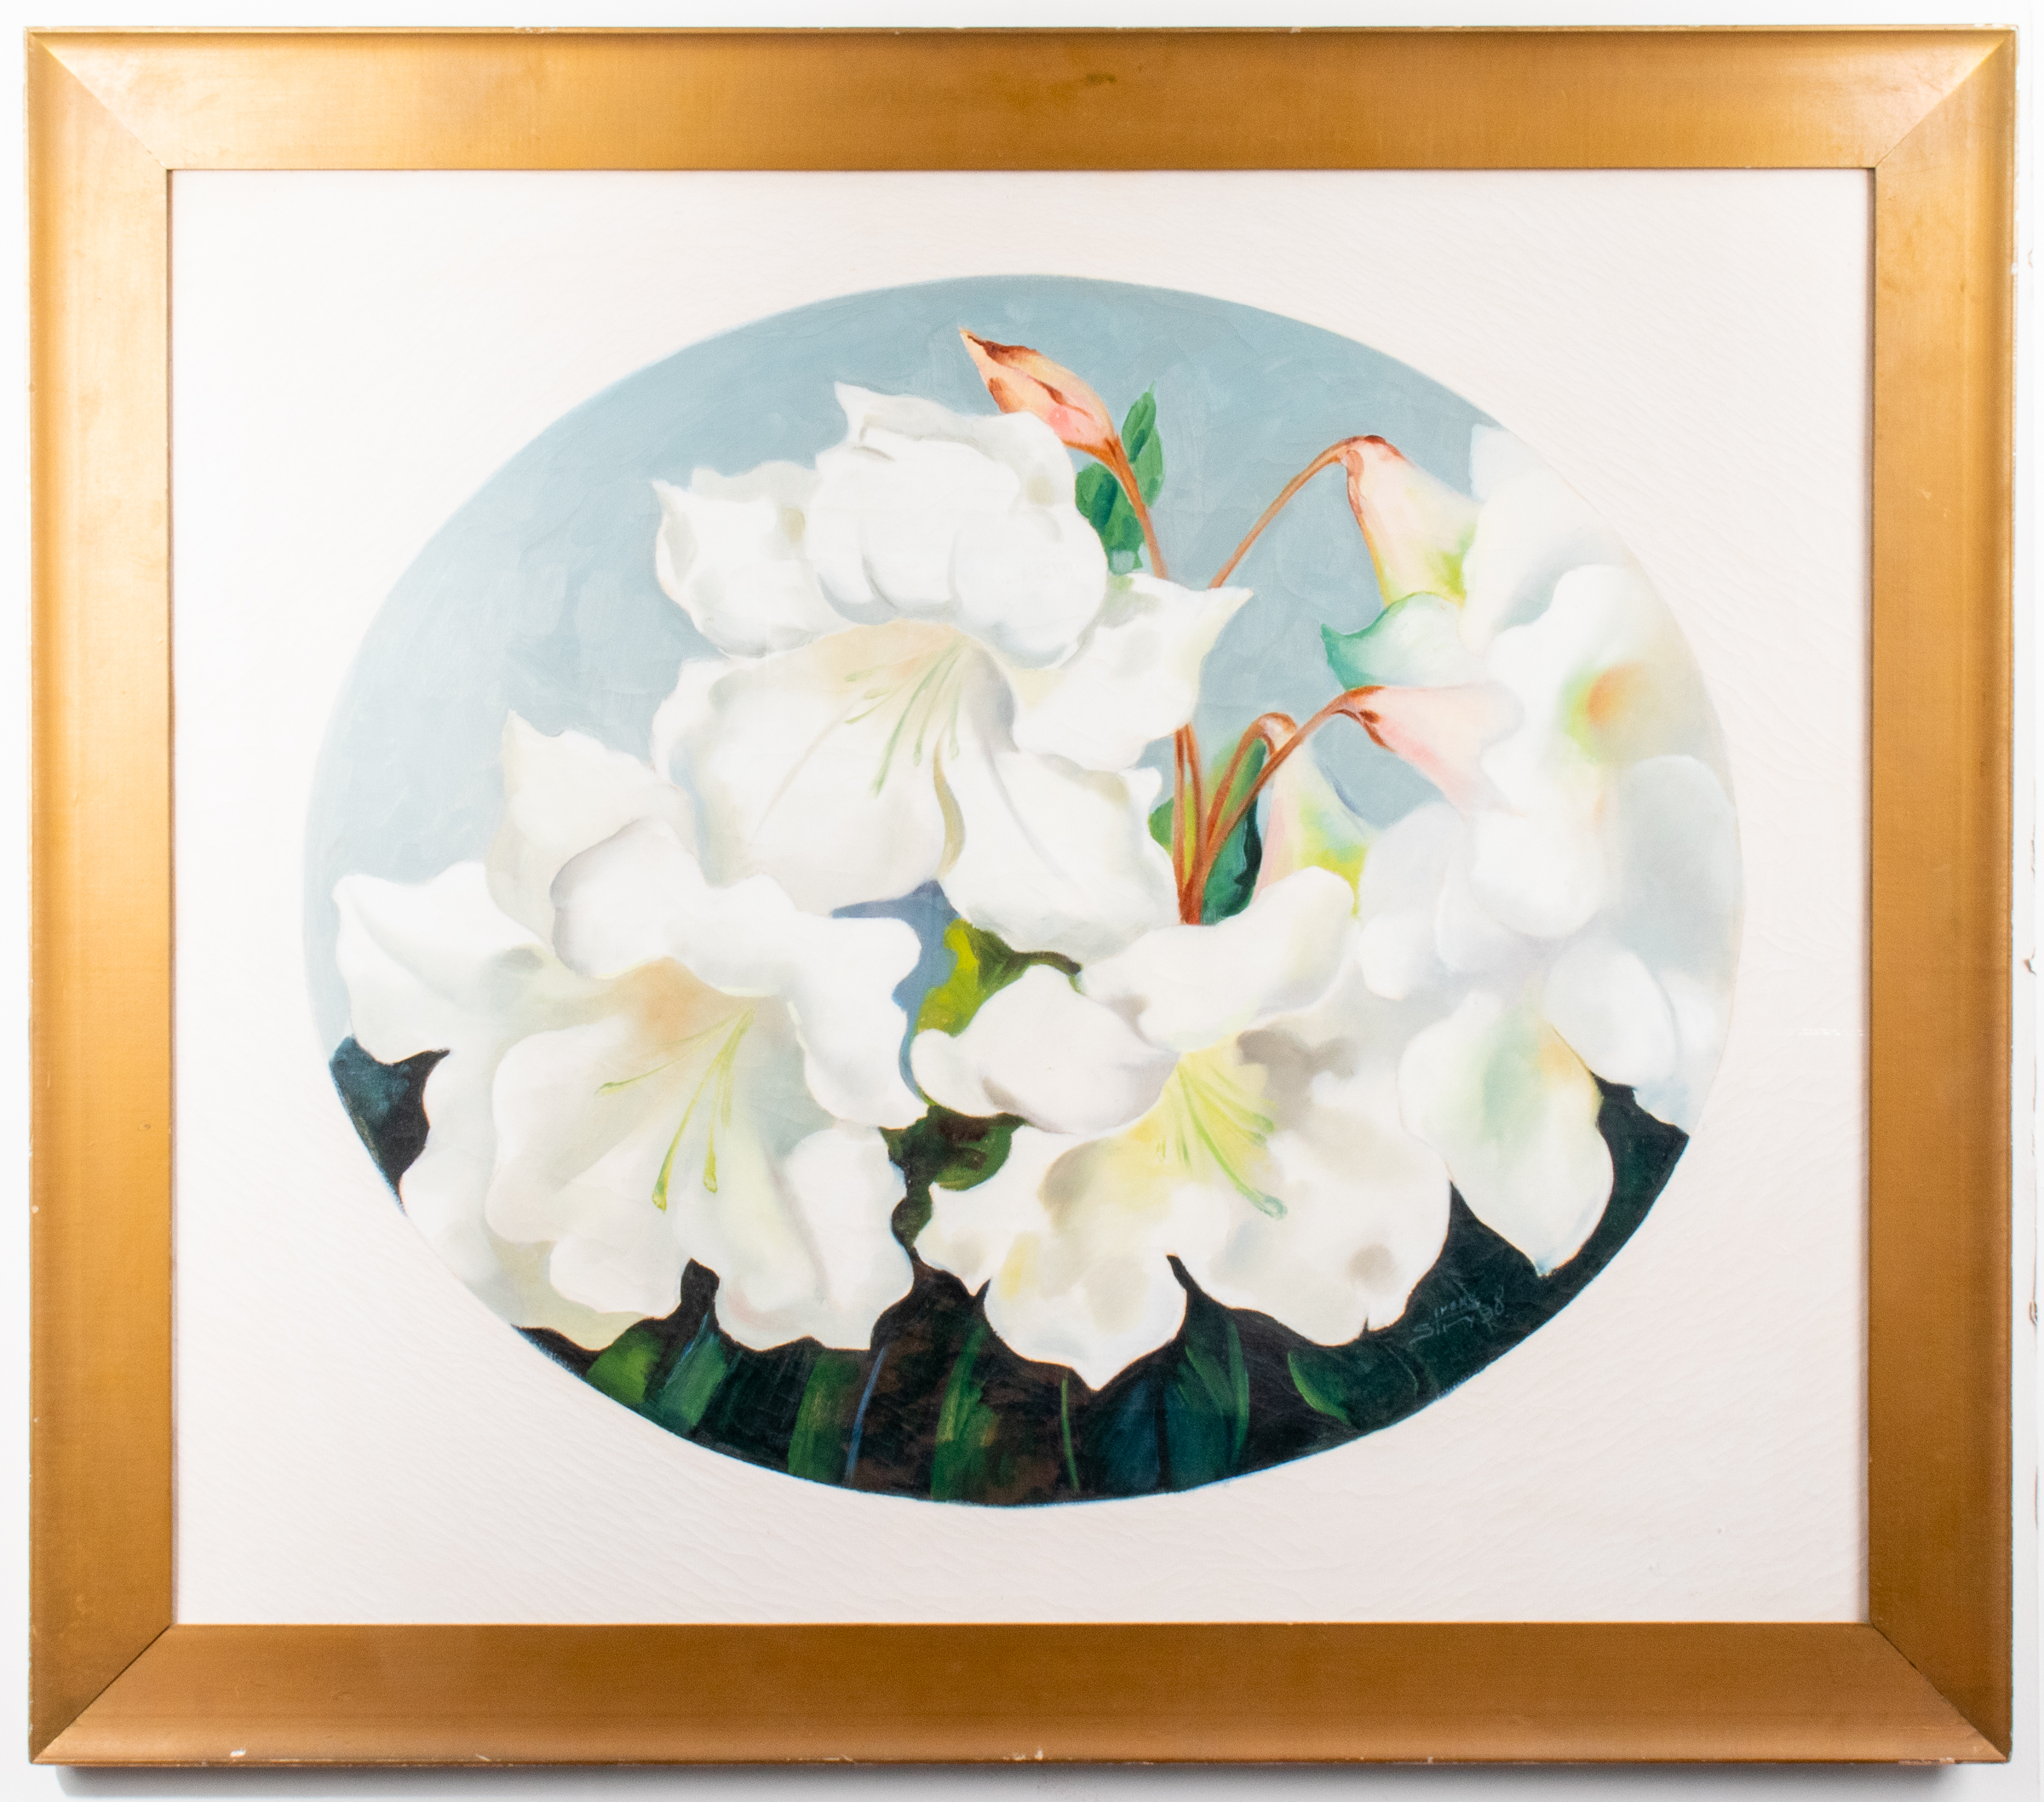 IRENE STRY "MADONNA LILIES" OIL